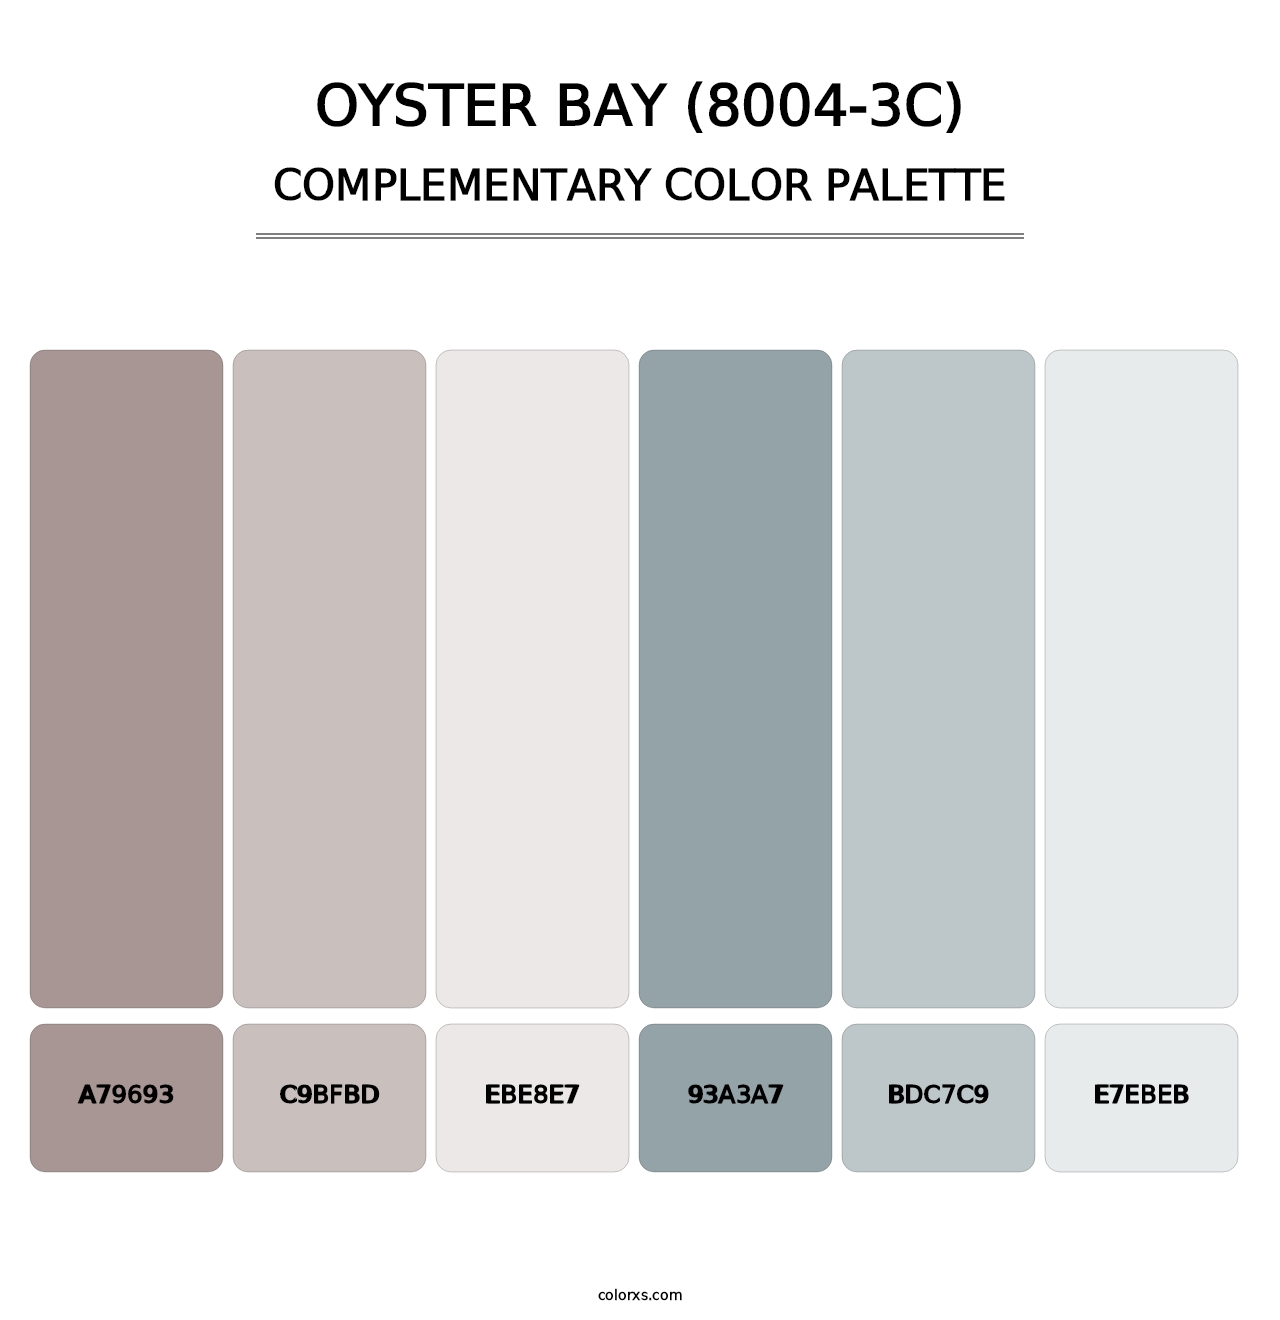 Oyster Bay (8004-3C) - Complementary Color Palette